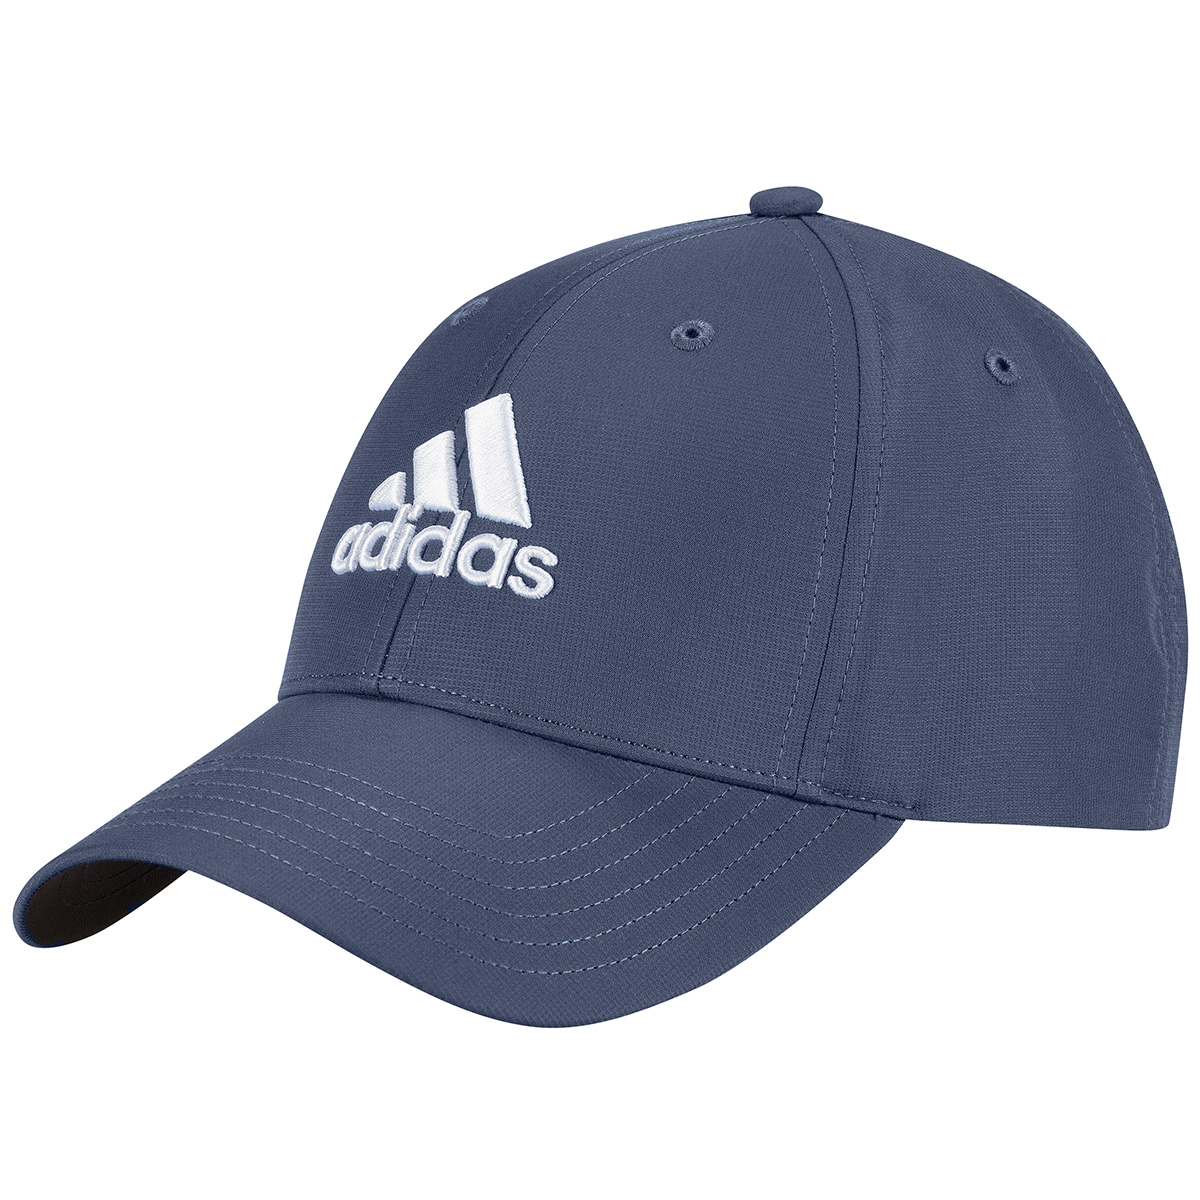 adidas Performance Cap from american golf